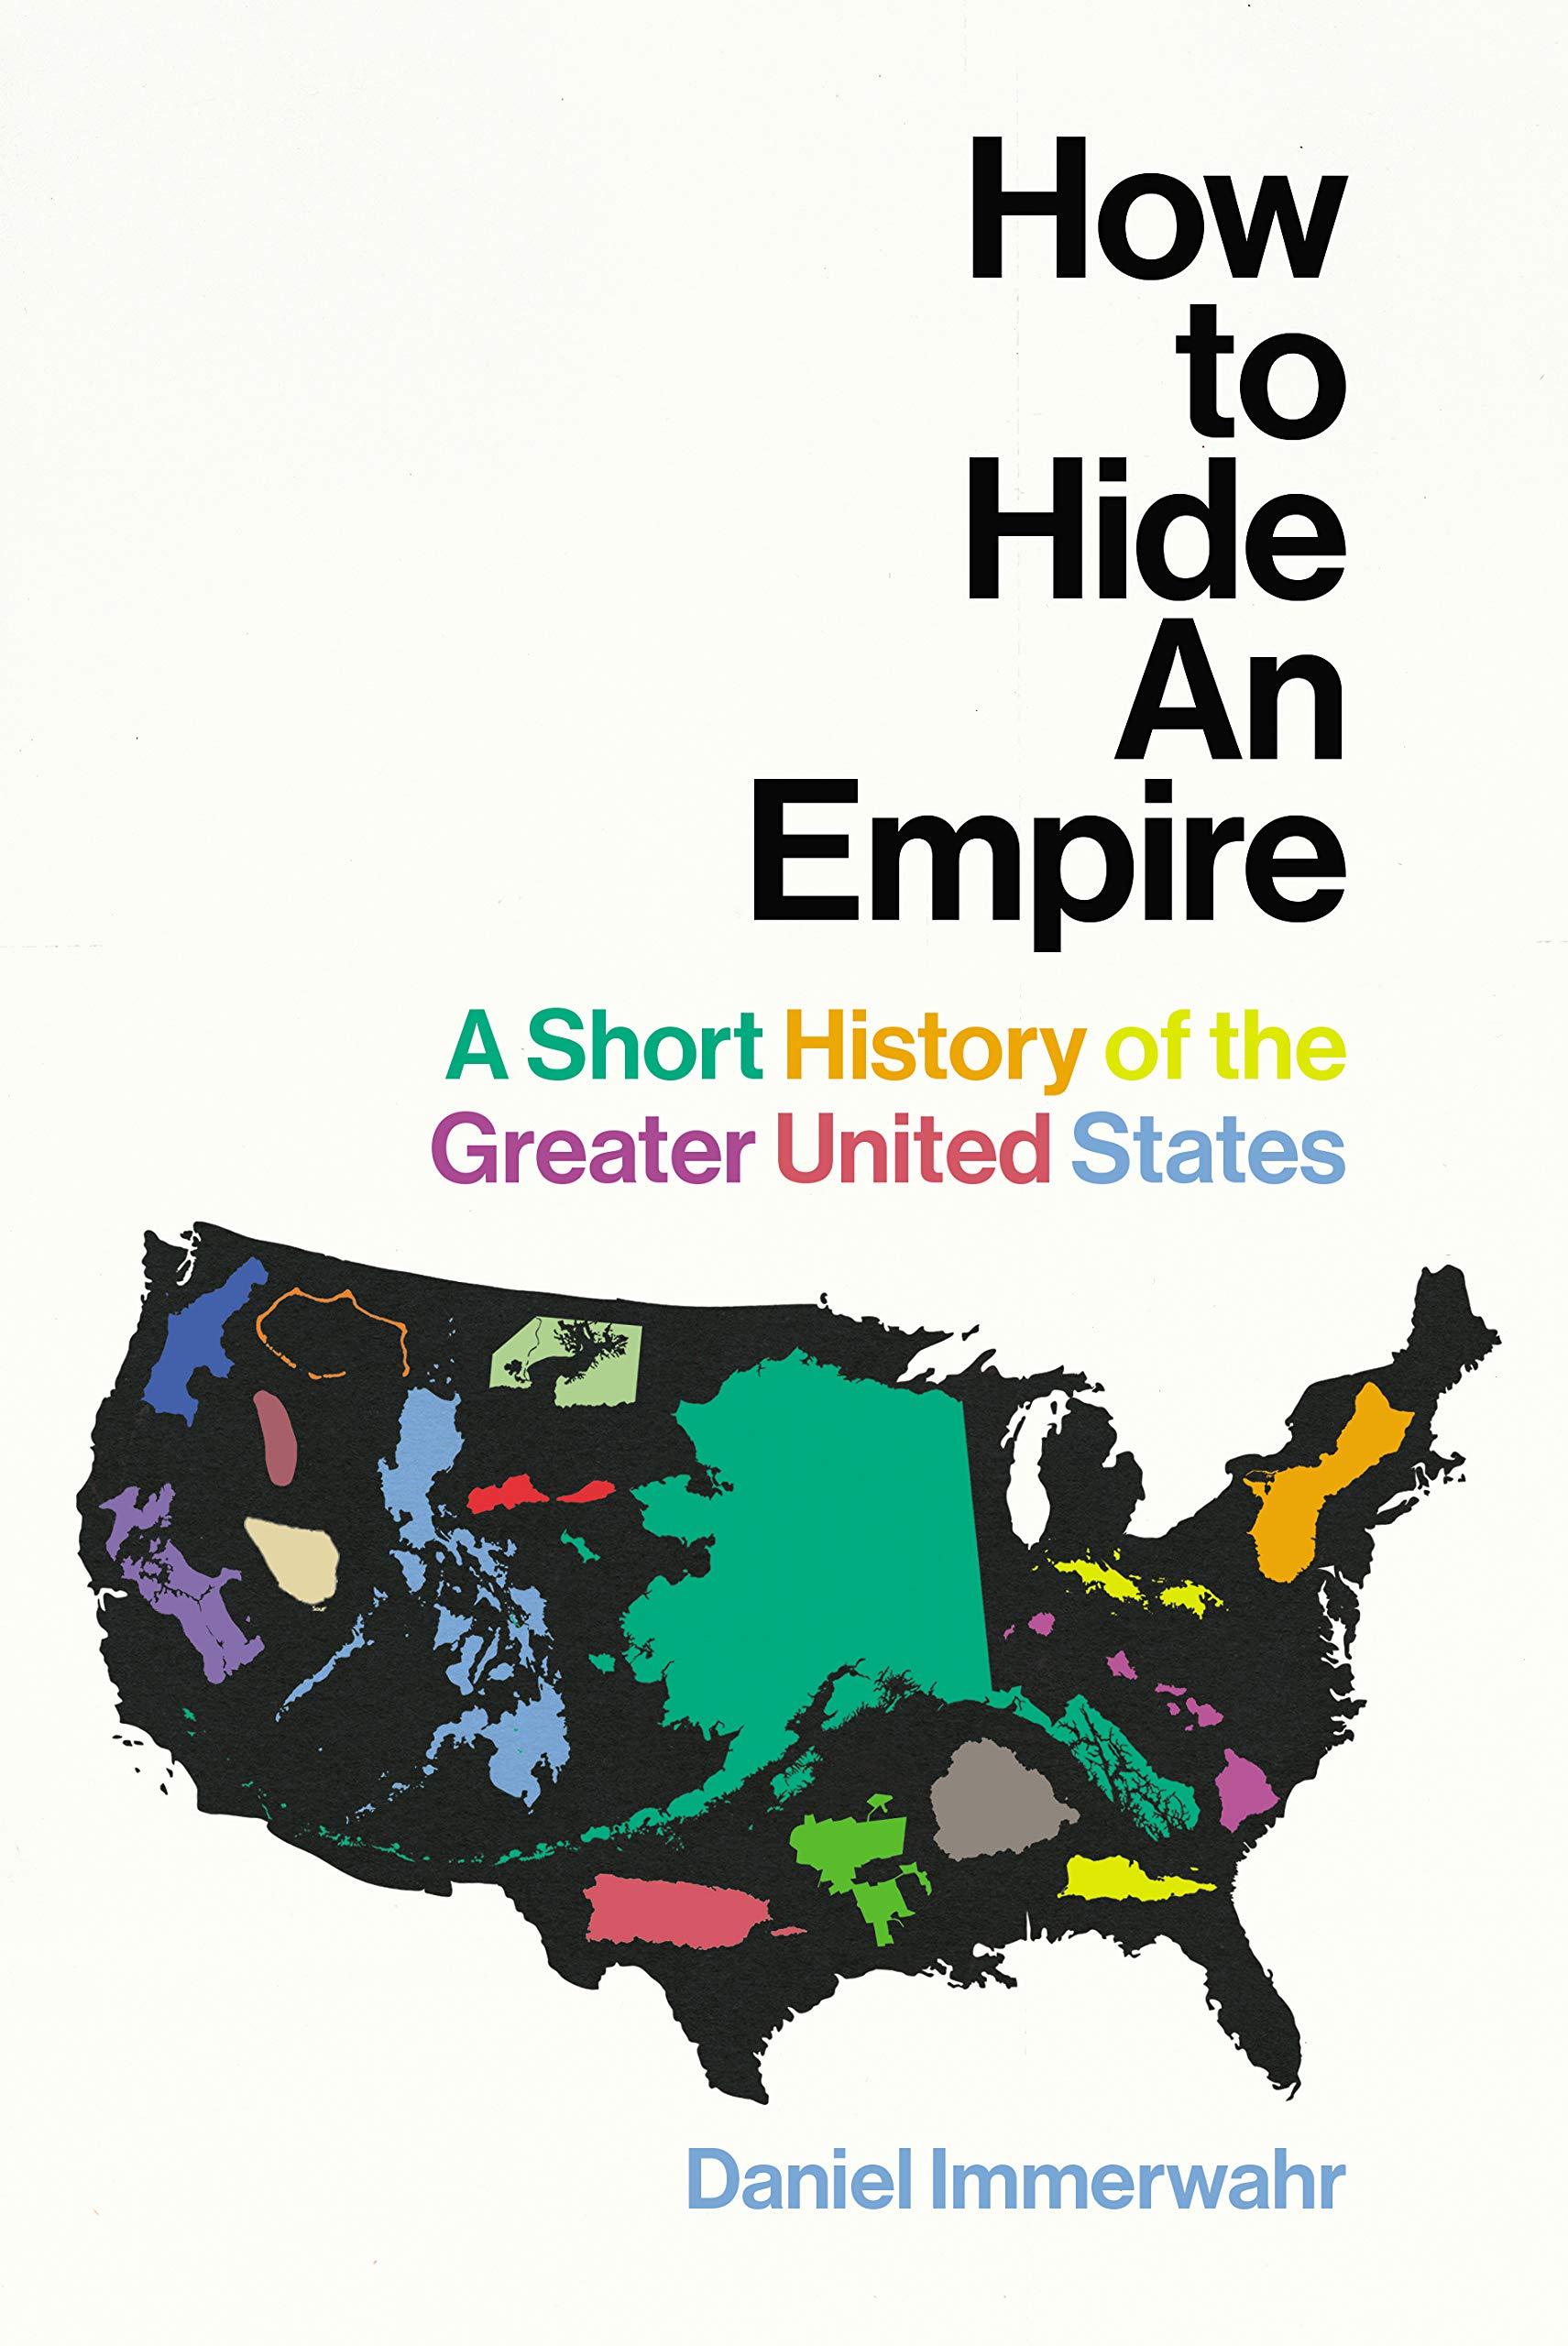 Immerwahr's How to Hide An Empire